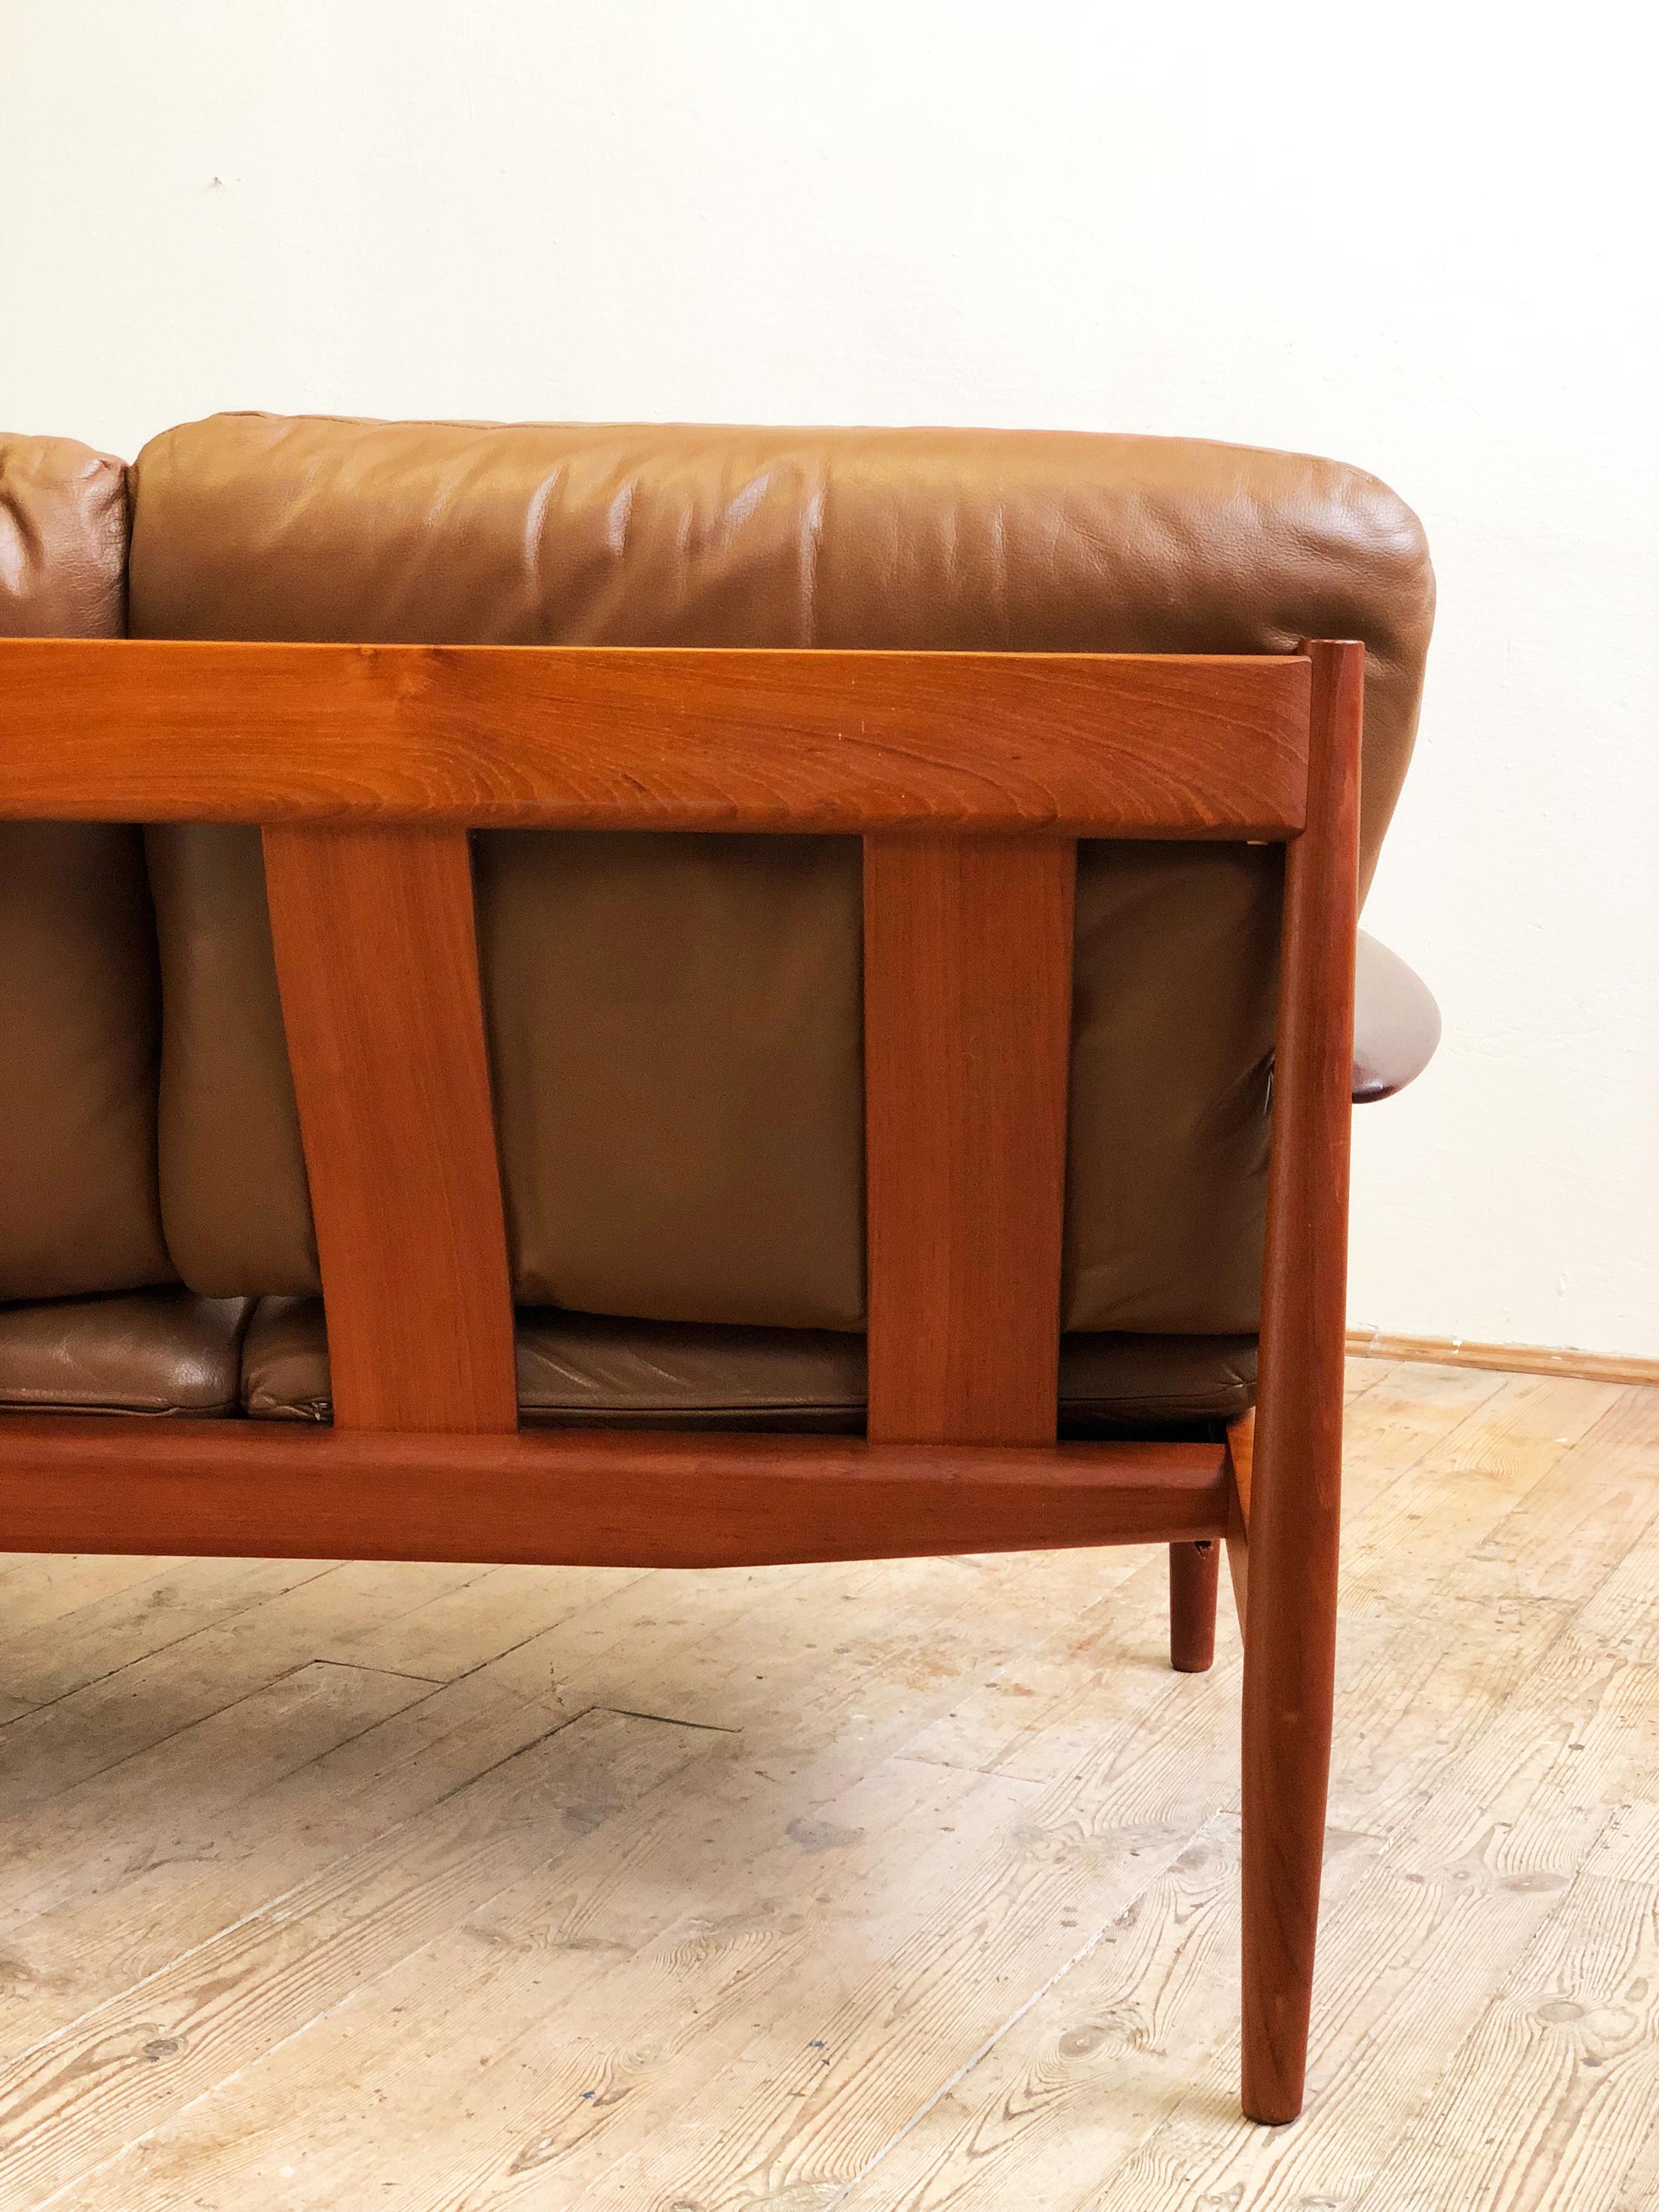 Midcentury Teak Sofa with Leather Cushions by Grete Jalk for Cado For Sale 2